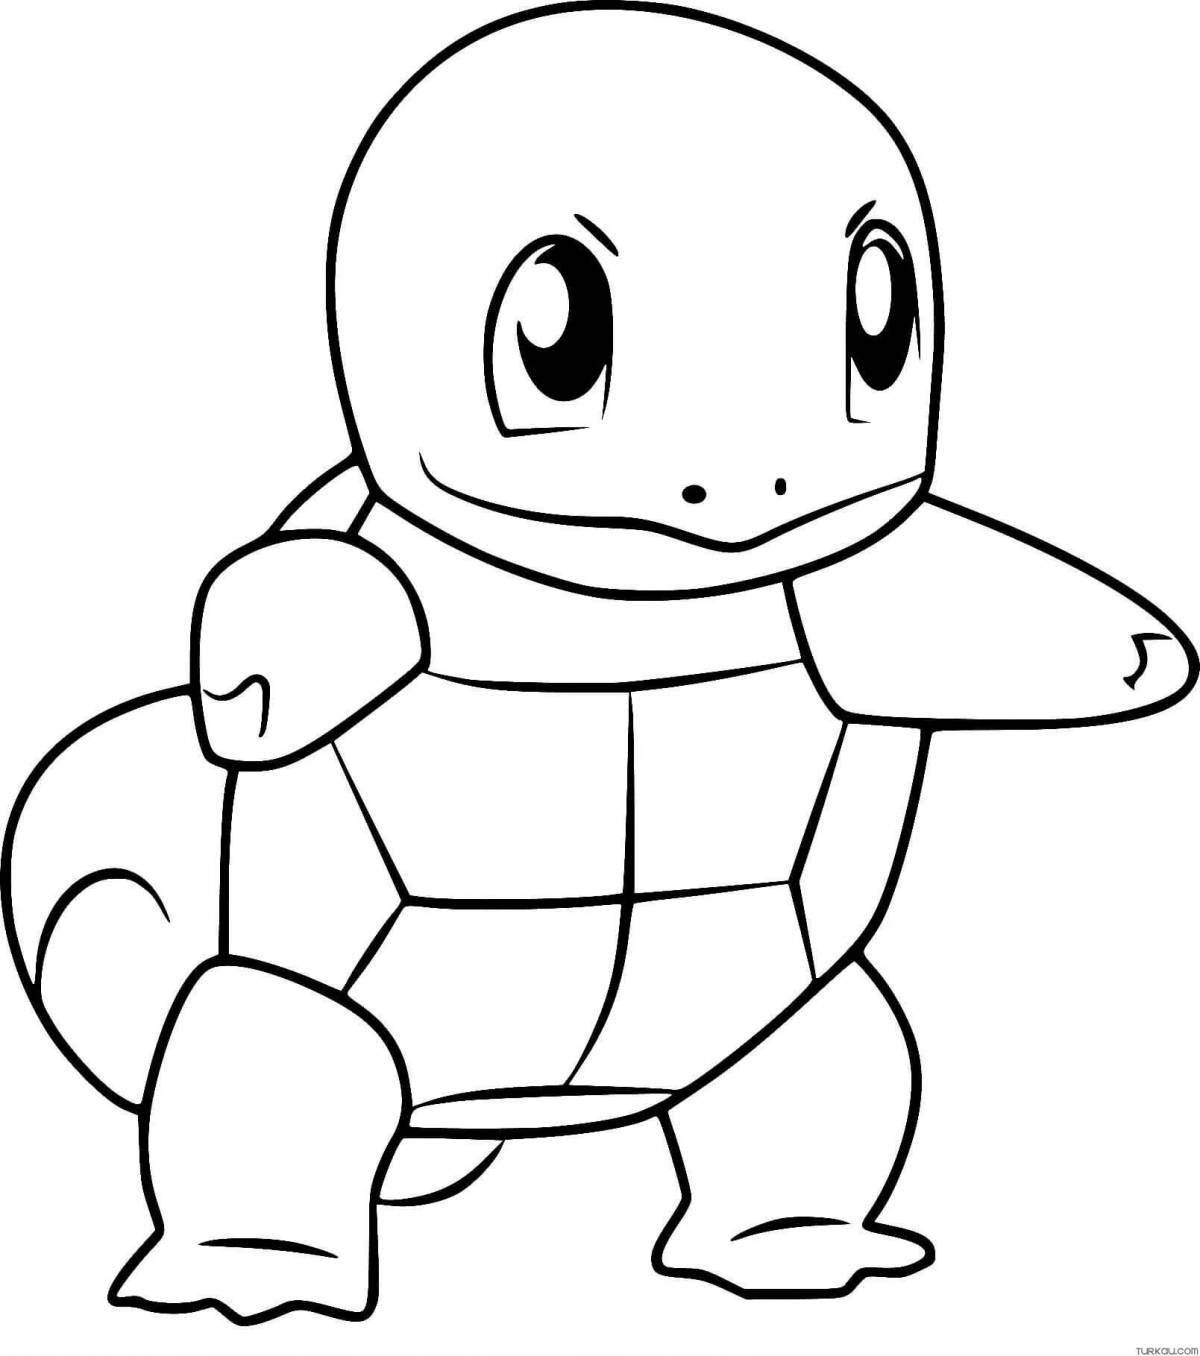 Splendid squirtle pokemon coloring page